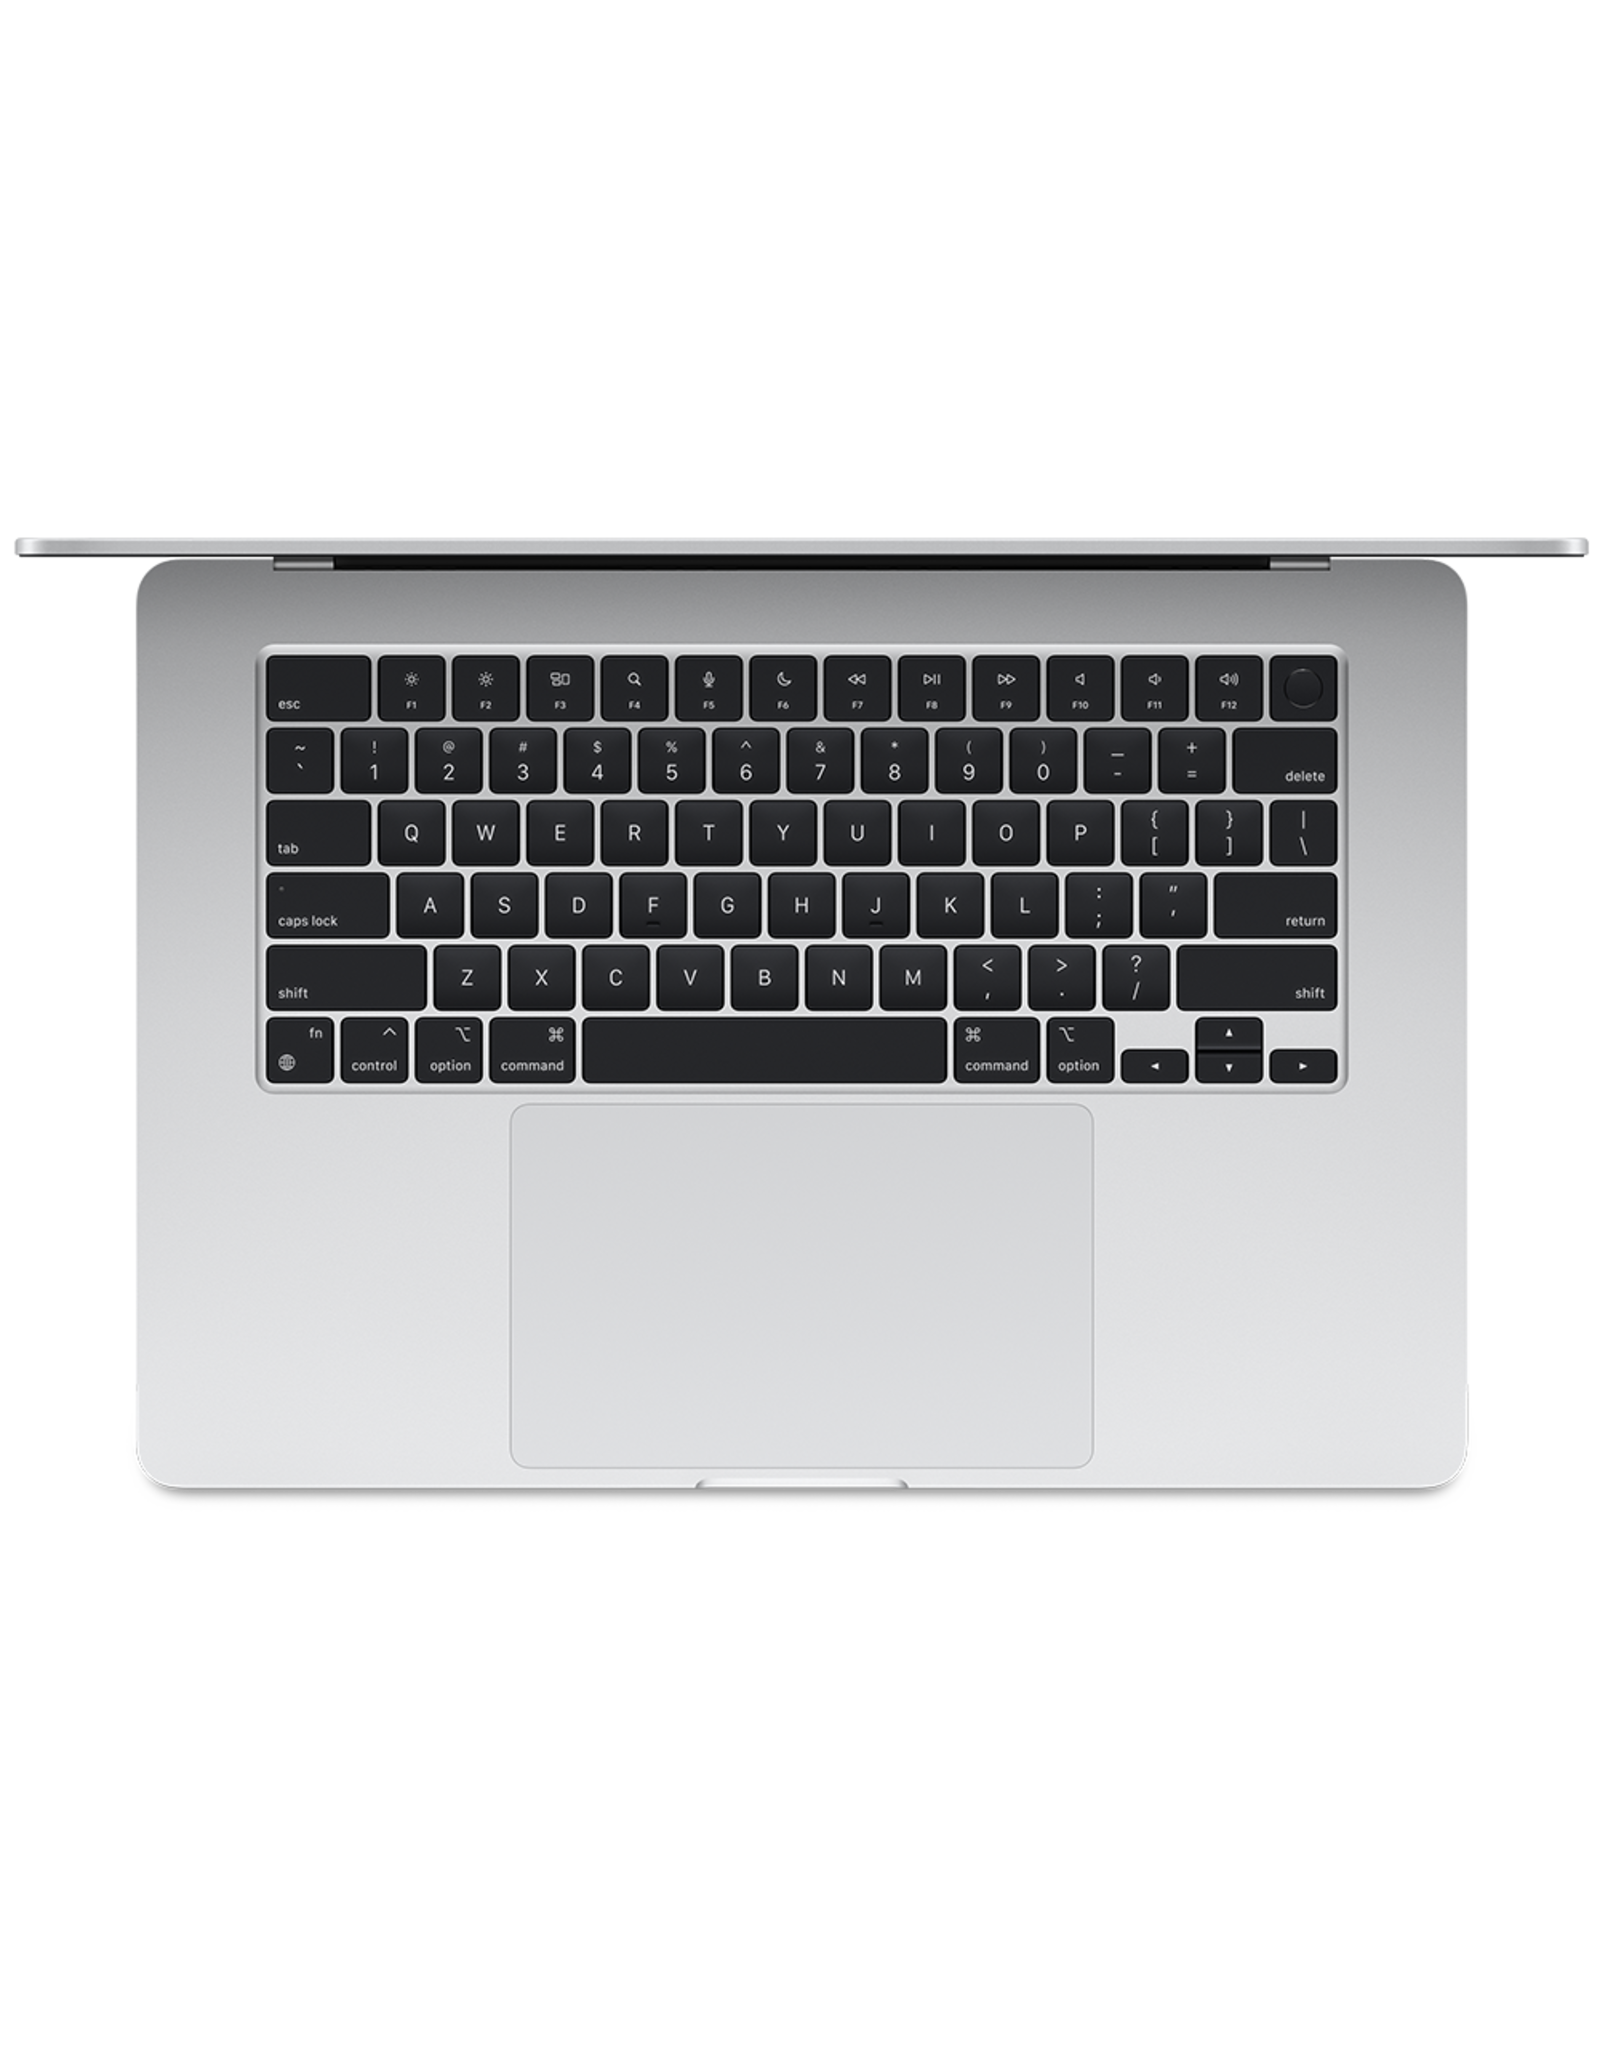 Apple 15-inch MacBook Air: Apple M2 chip with 8-core CPU and 10-core GPU, 256GB - Silver